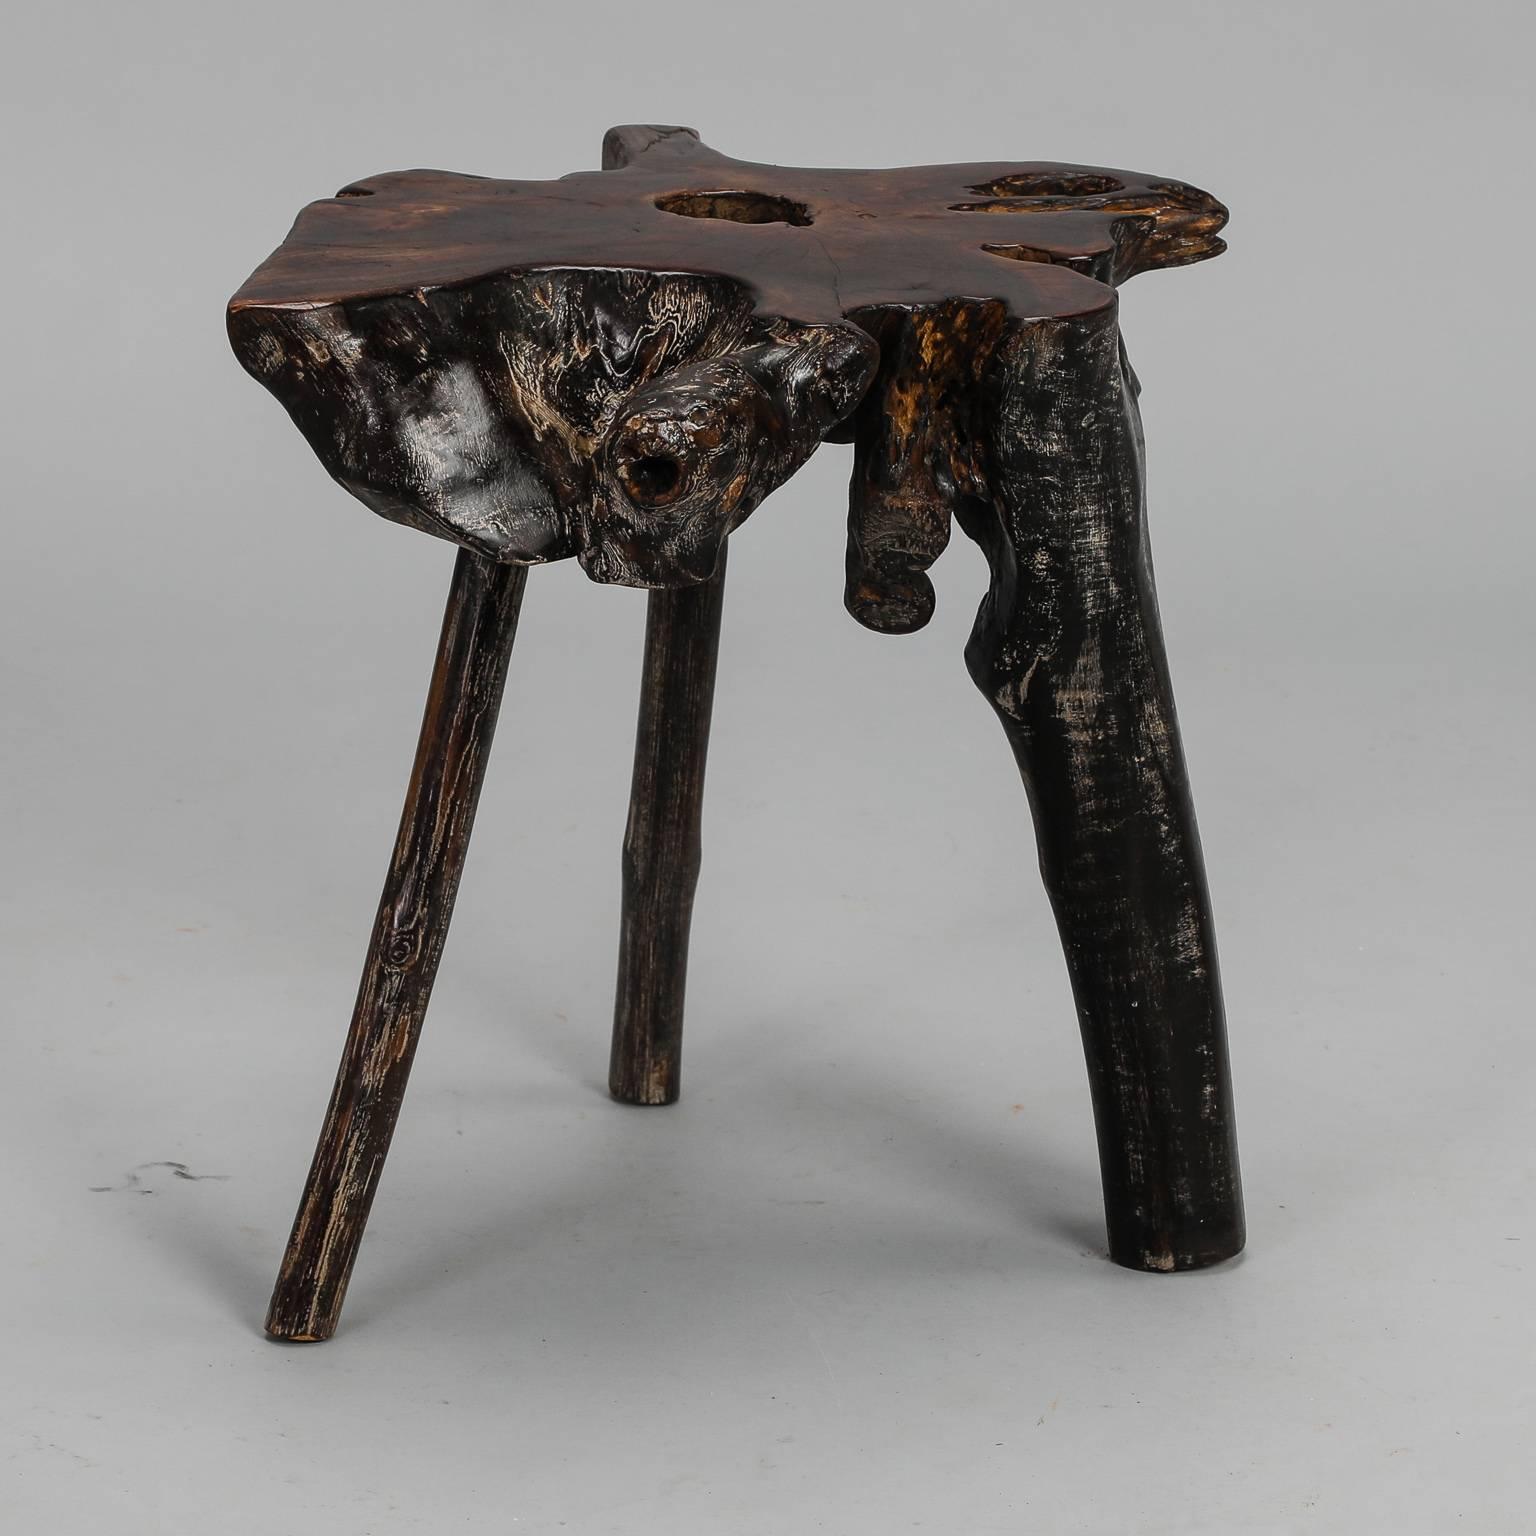 Chinese side table made from root ball of a tree dates from approximately 1960. Organically shaped table top has a hole in it where roots separate. Legs are natural form roots and all have been sanded, stained and sealed. One other similar table